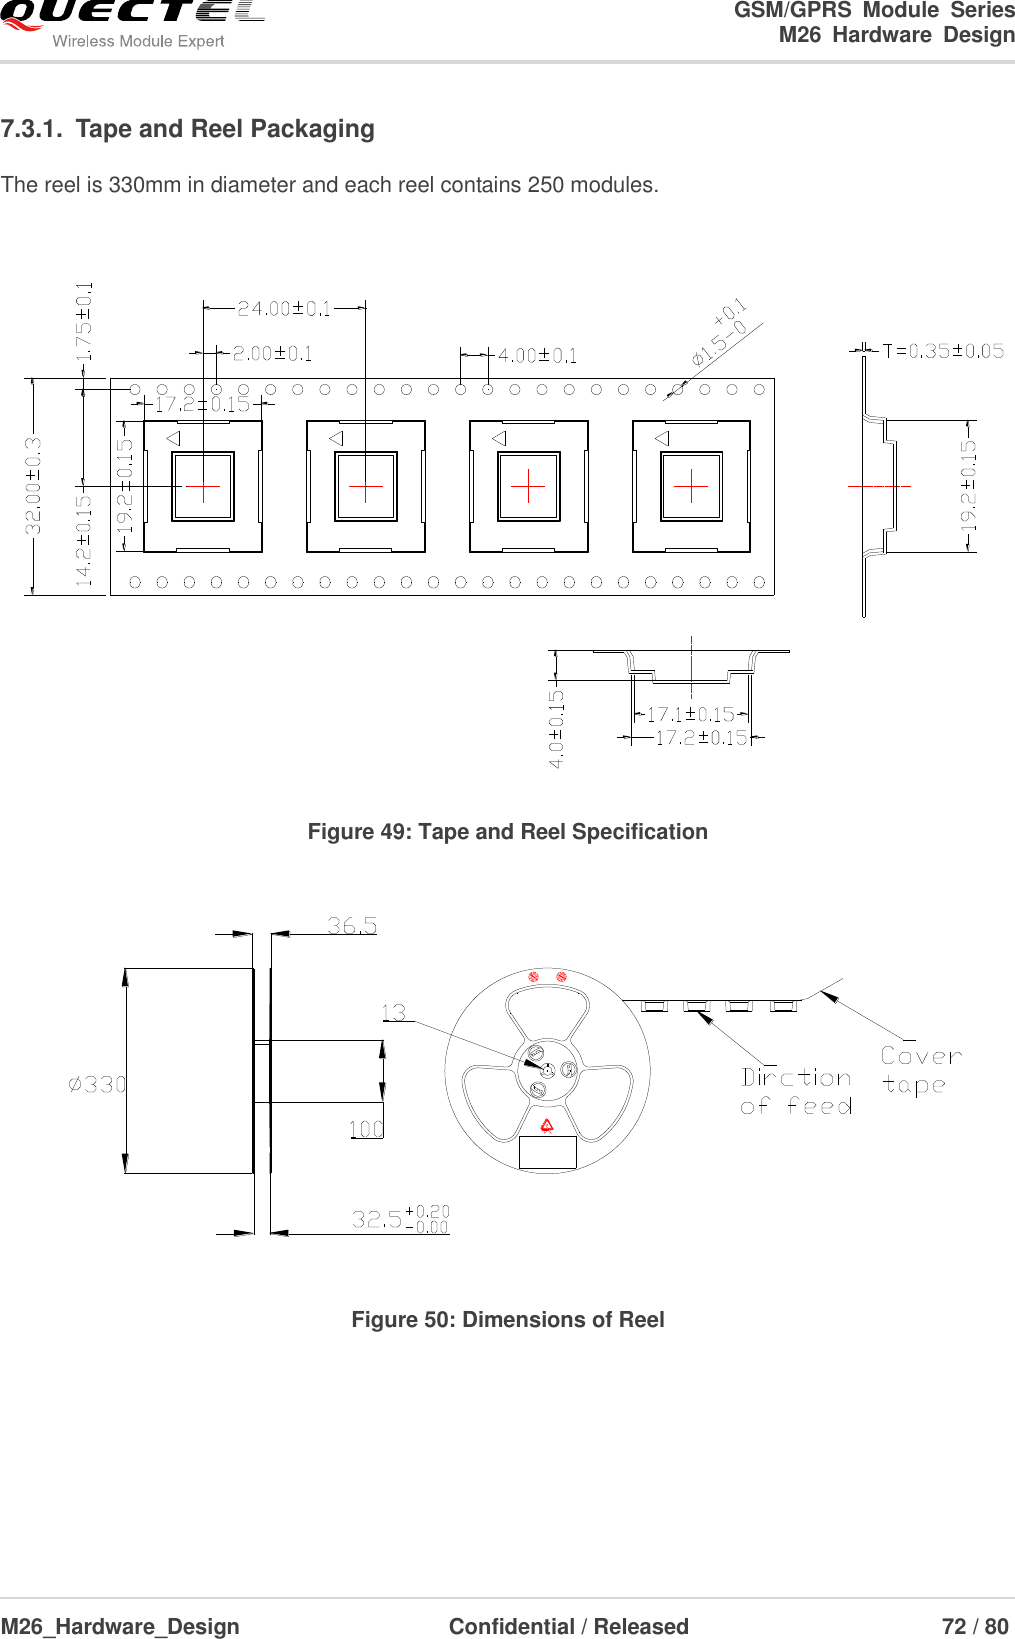                                                                        GSM/GPRS  Module  Series                                                                 M26  Hardware  Design  M26_Hardware_Design                     Confidential / Released                              72 / 80      7.3.1.  Tape and Reel Packaging The reel is 330mm in diameter and each reel contains 250 modules.   Figure 49: Tape and Reel Specification   Figure 50: Dimensions of Reel 